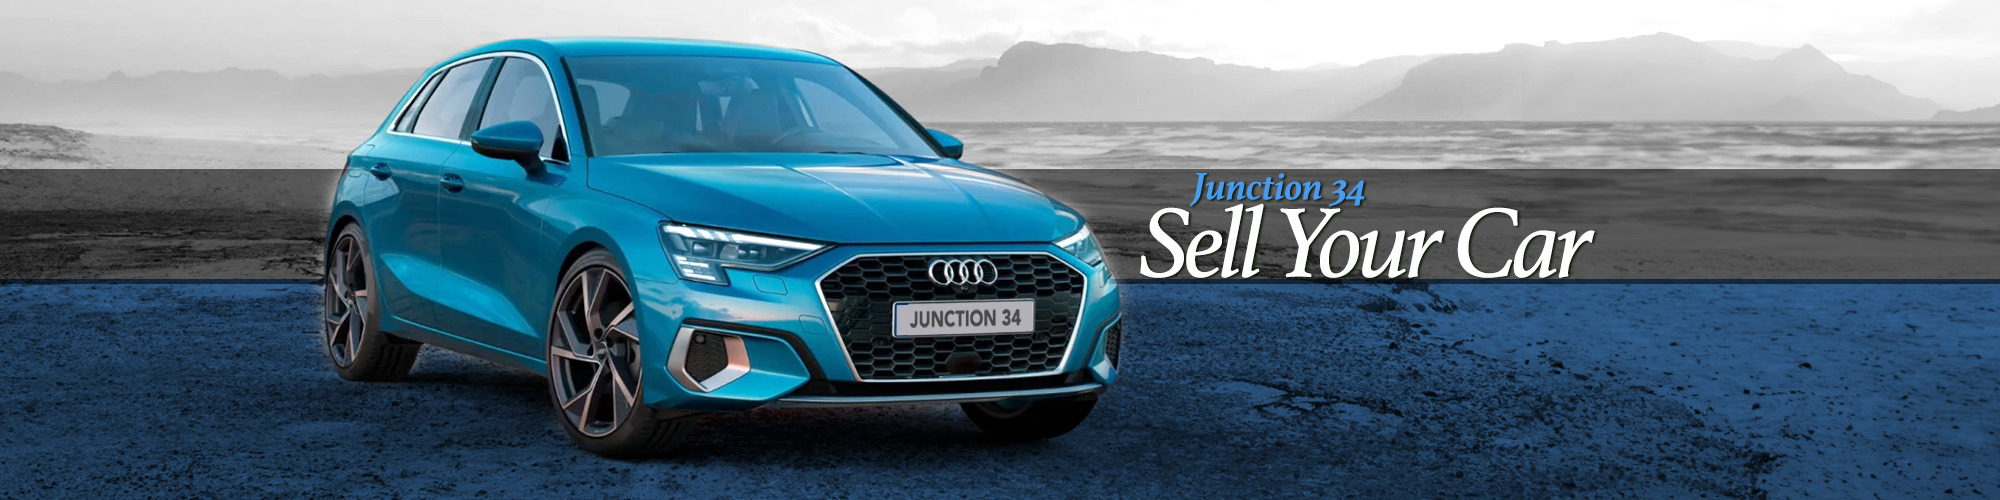 Sell Your Vehicle at Junction 34 Car Sales